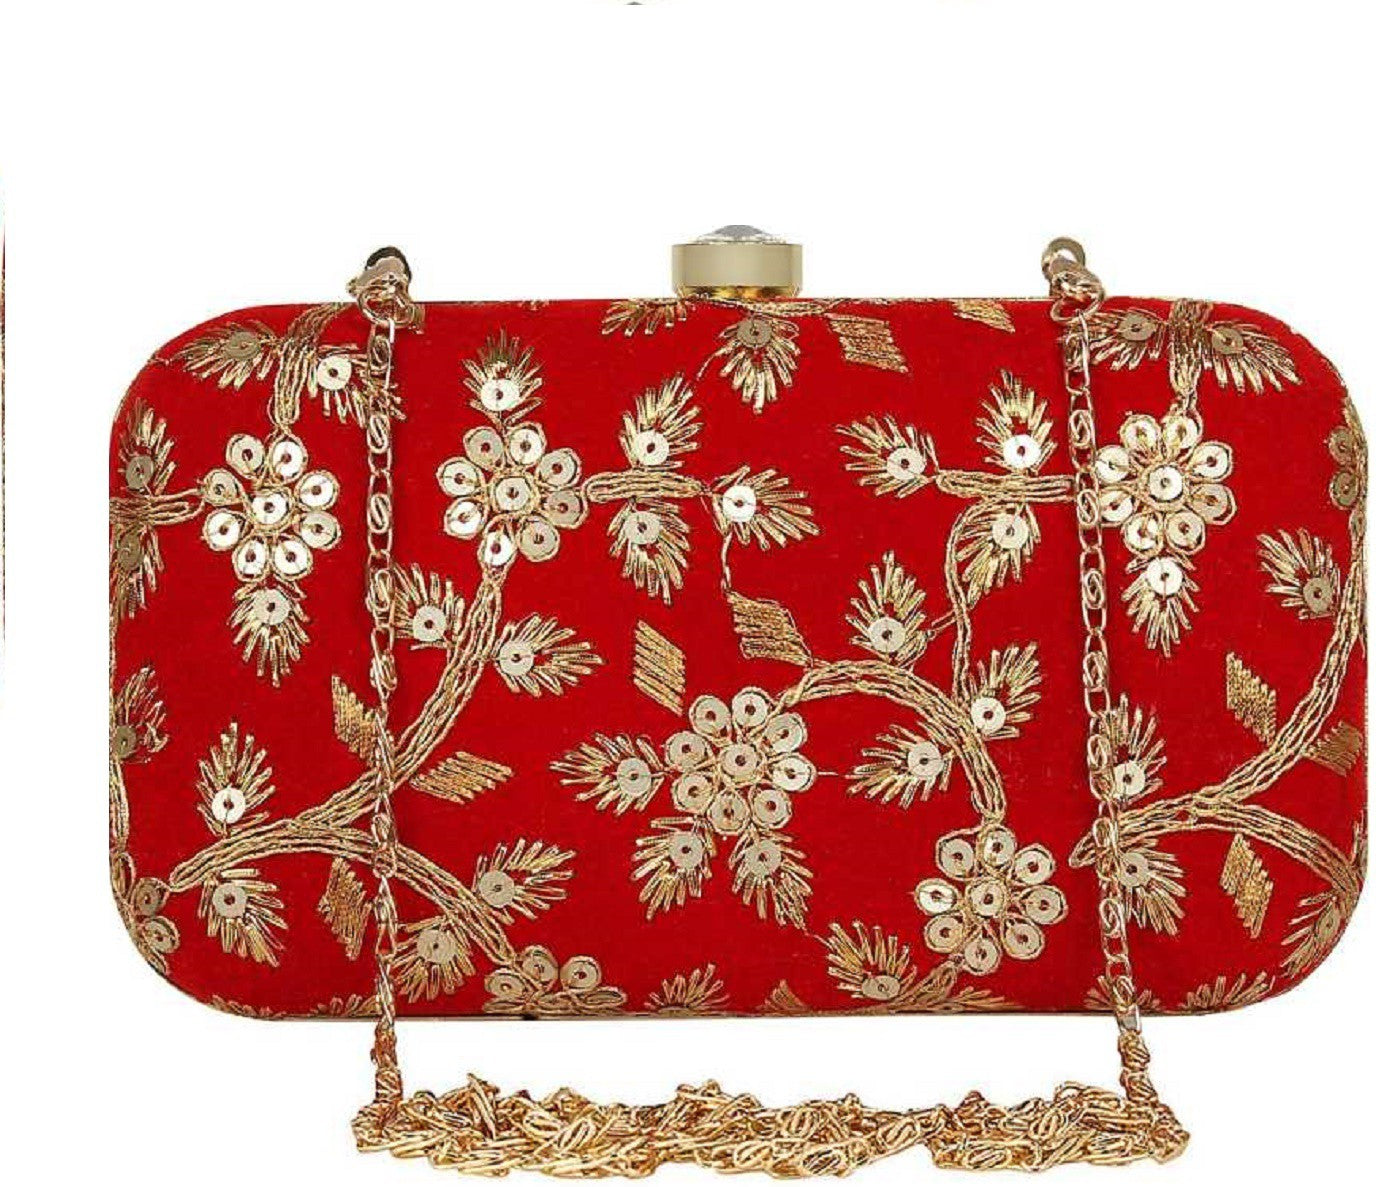 Women's Handicraft Party Wear Hand Embroidered Box Clutch Bag Purse For Bridal, Casual, Party, Wedding - Red - Ritzie